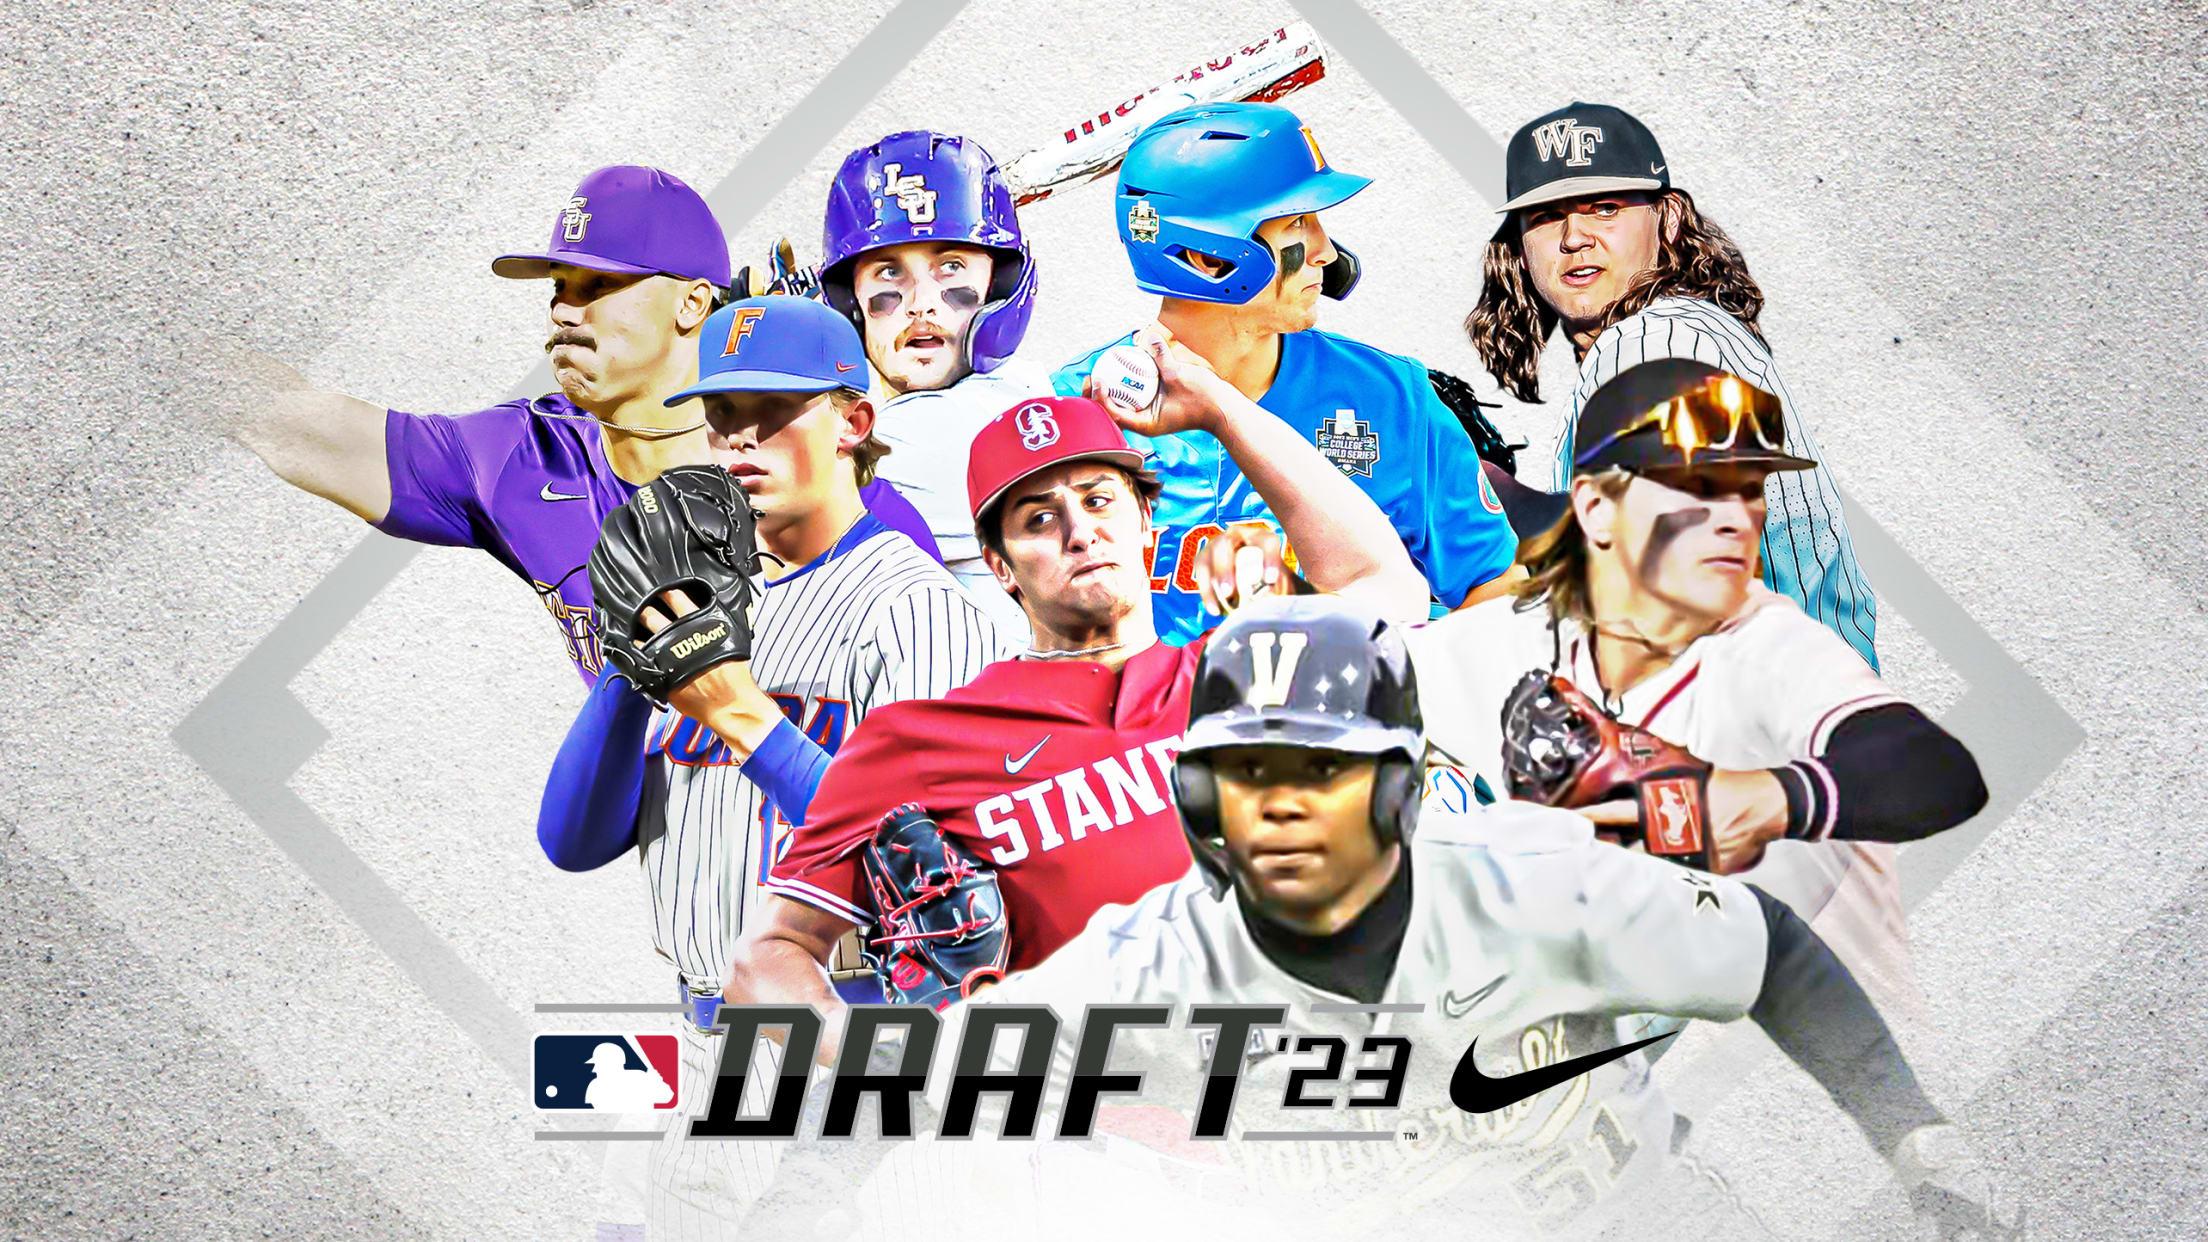 A photo illustration featuring eight Draft prospects